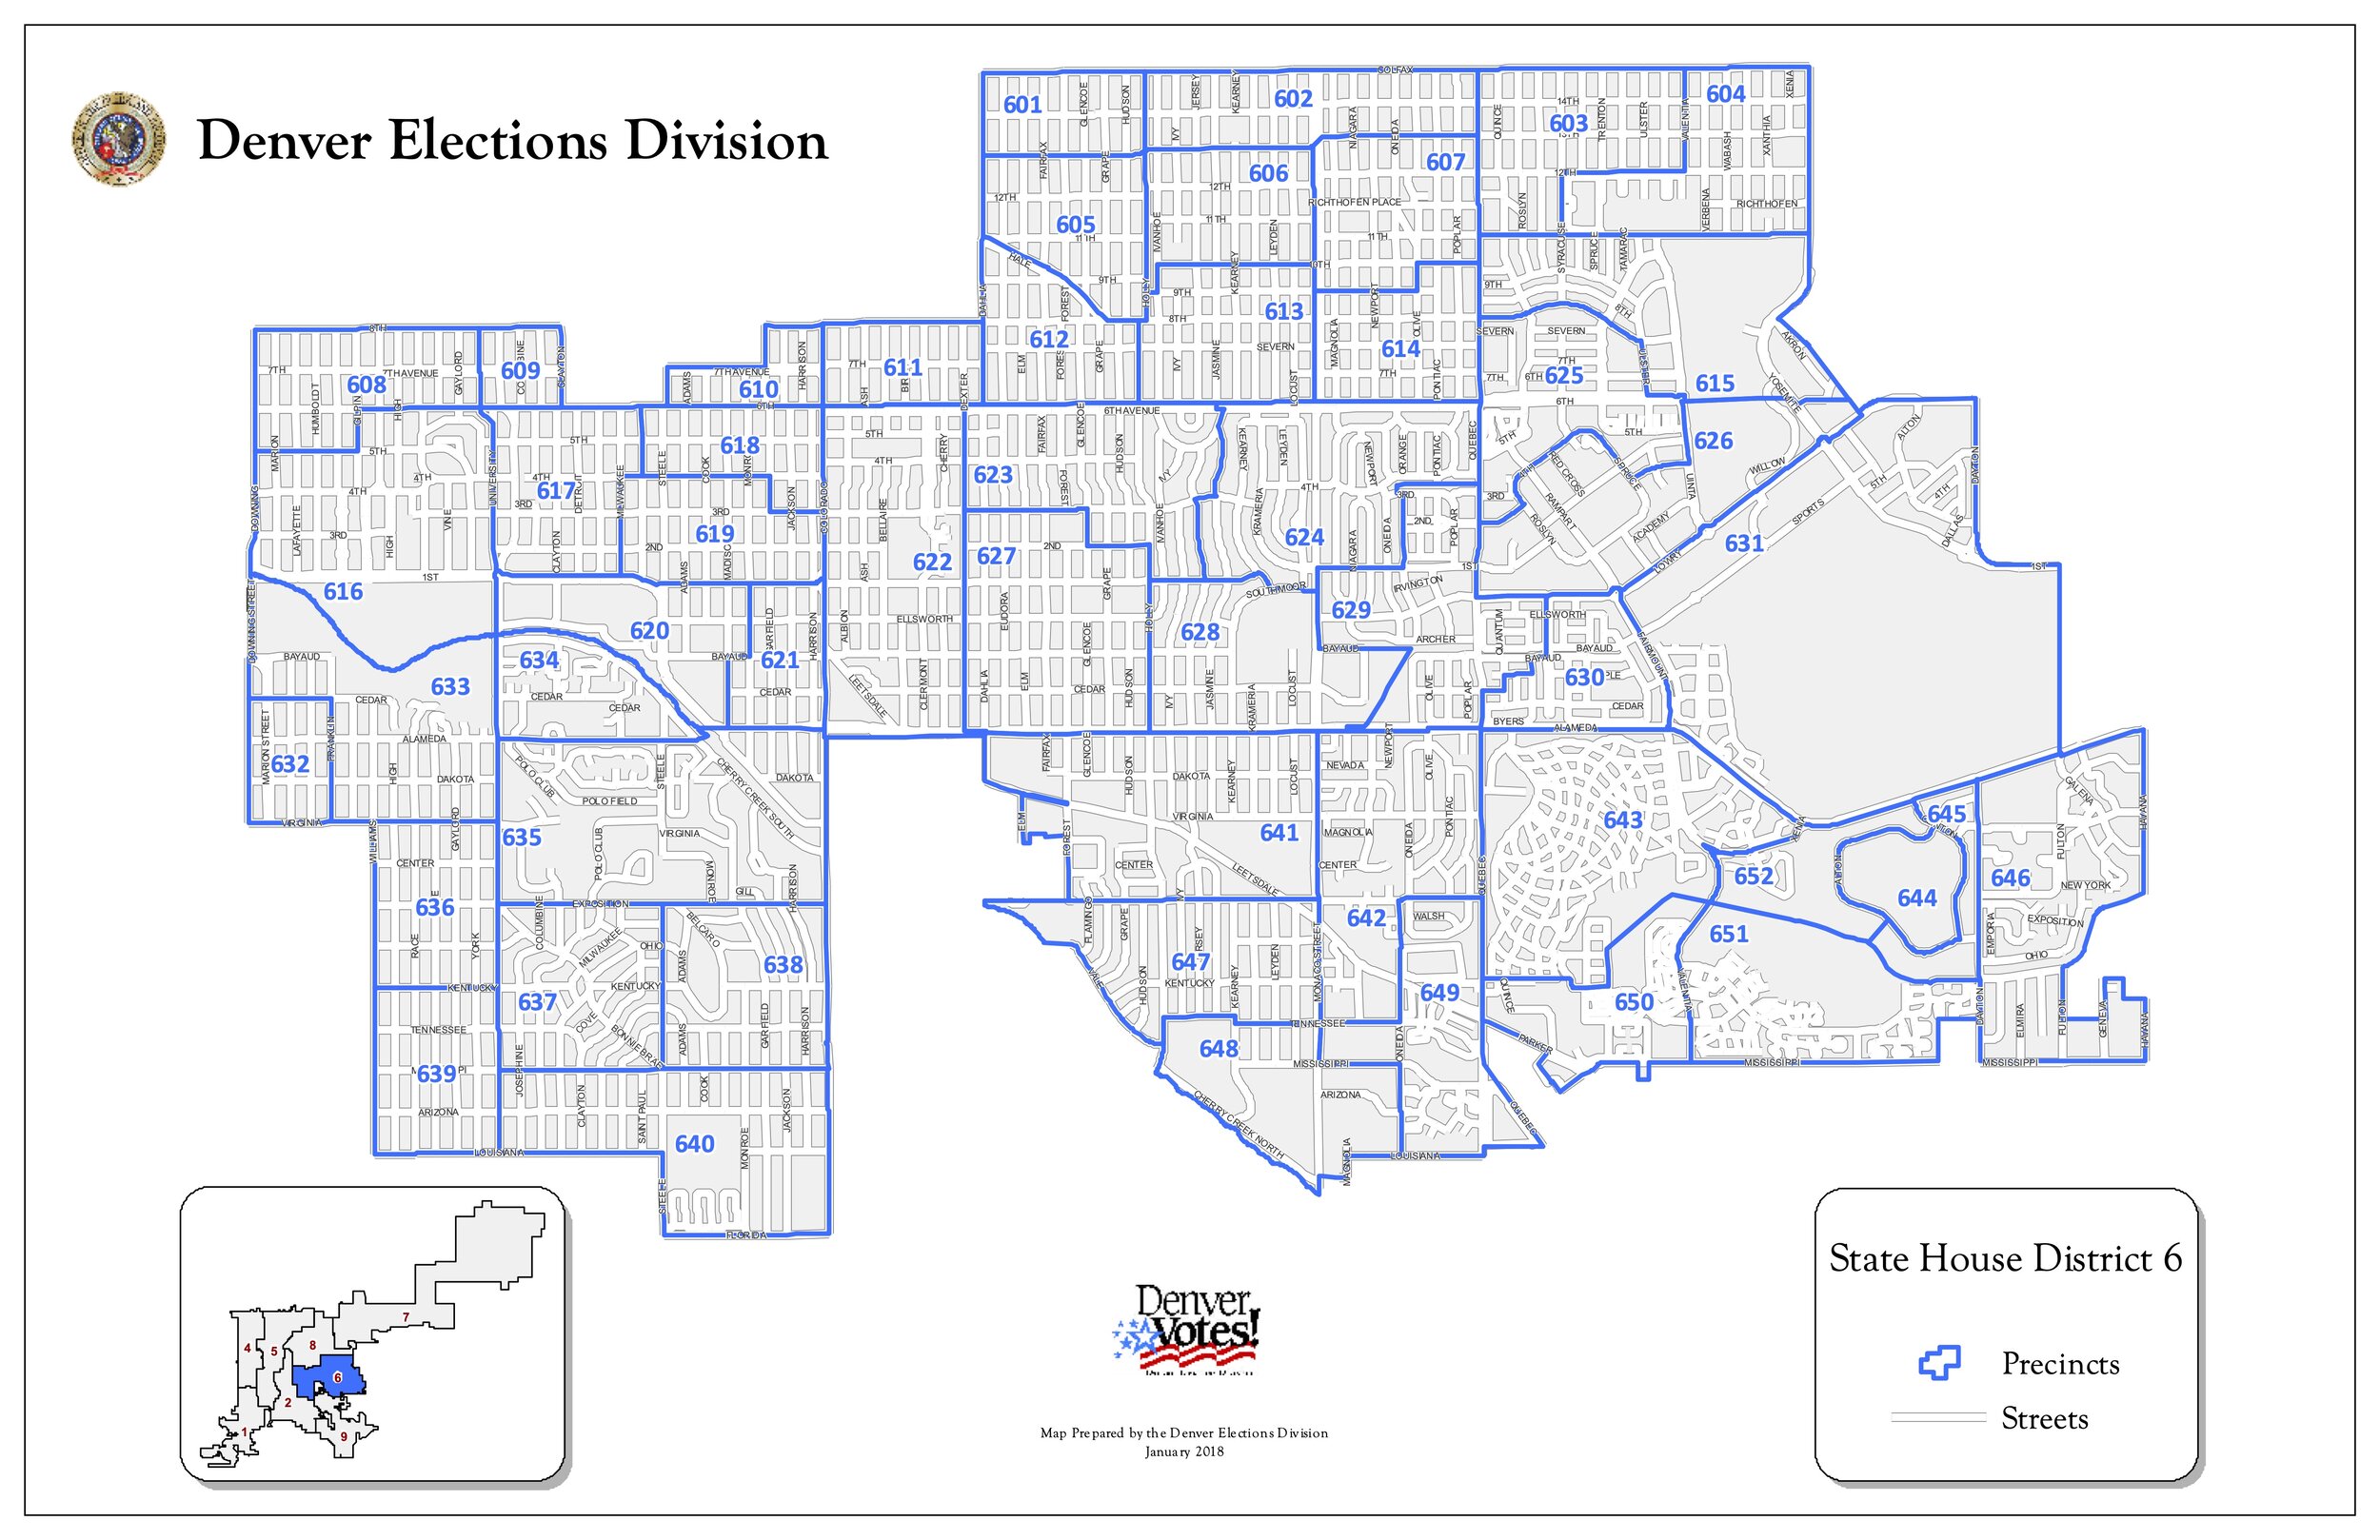 co-state-house-district-6-map-2018.jpg